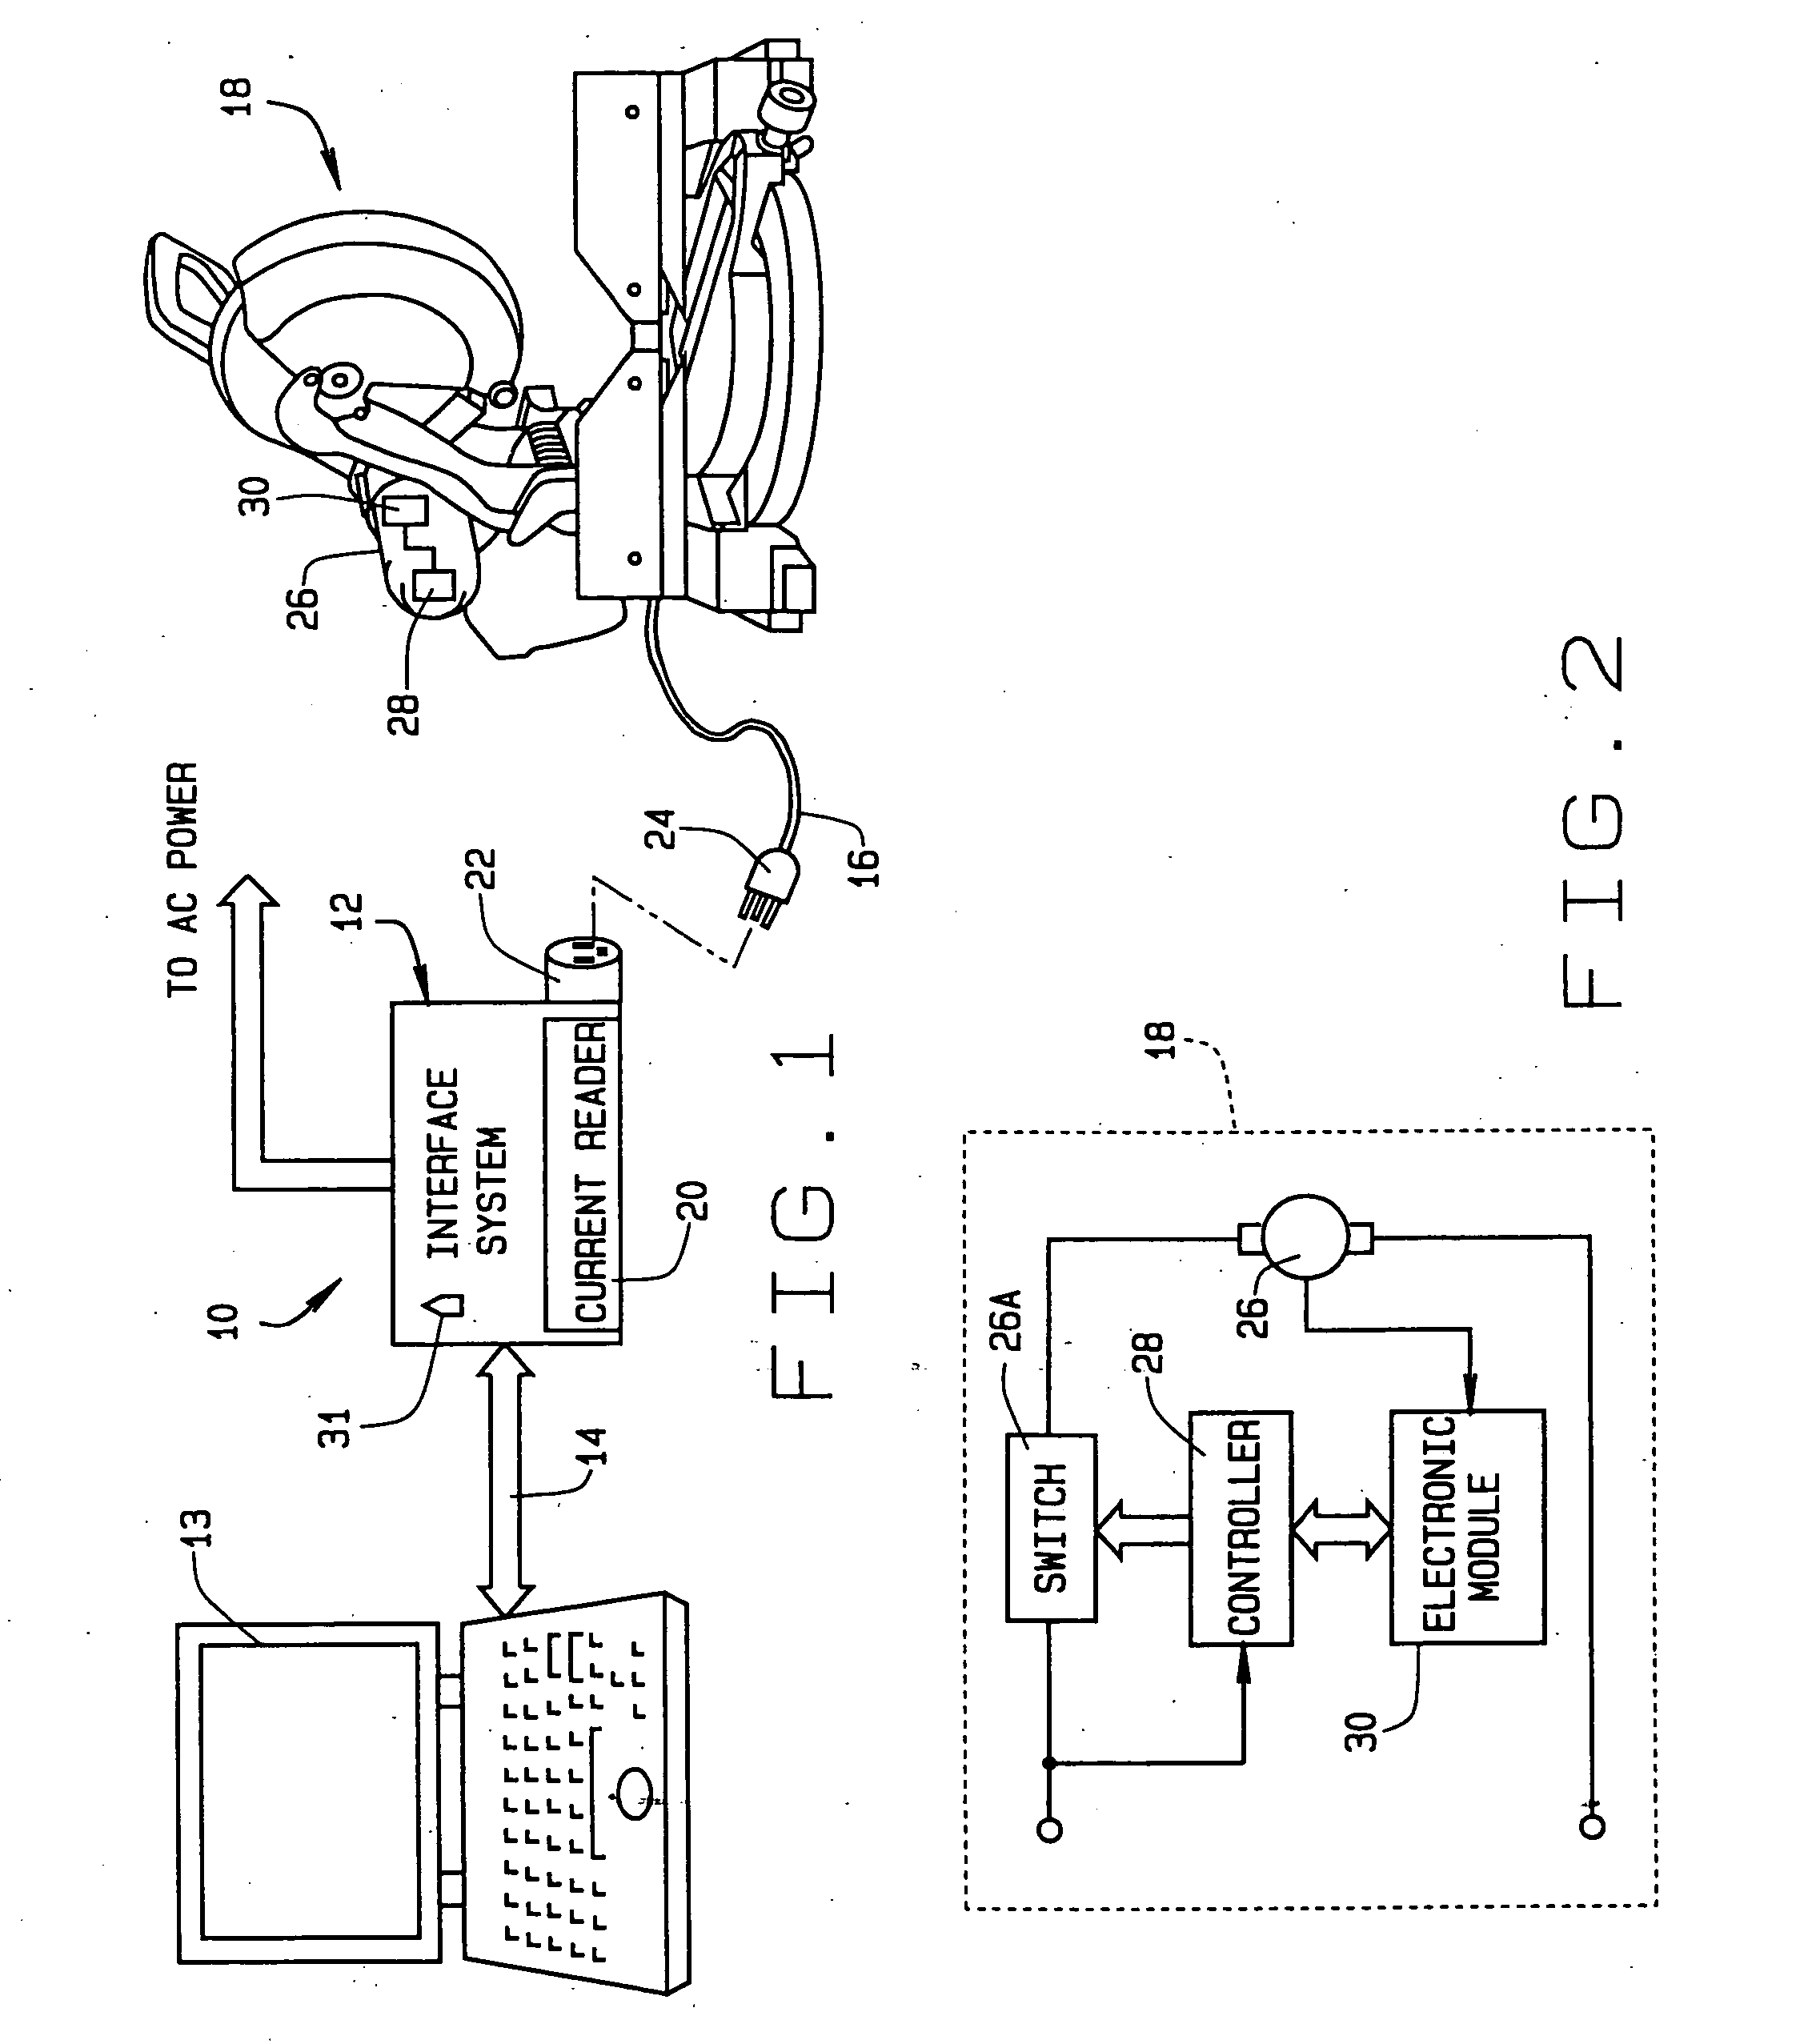 System and method for data retrieval in AC power tools via an AC line cord